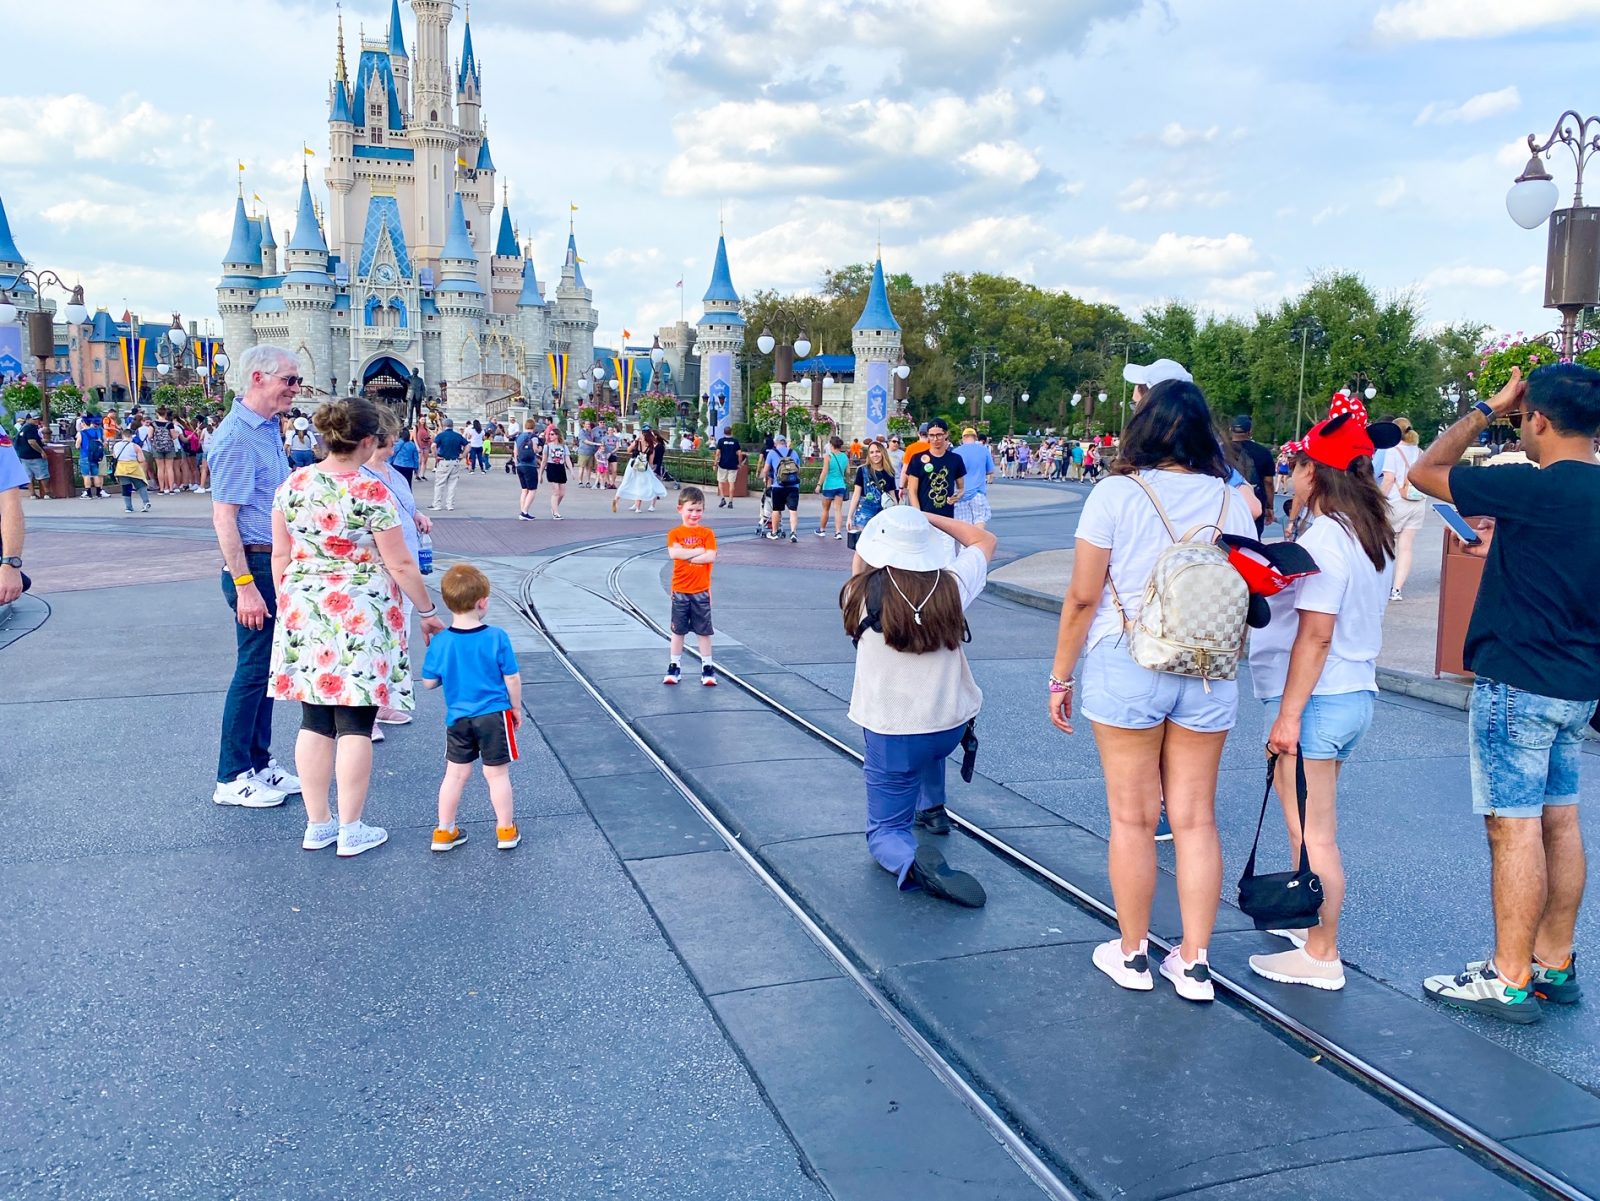 This photopass line in front of Cinderella's castle shows an example of how people line up to use Disney Memory Maker.